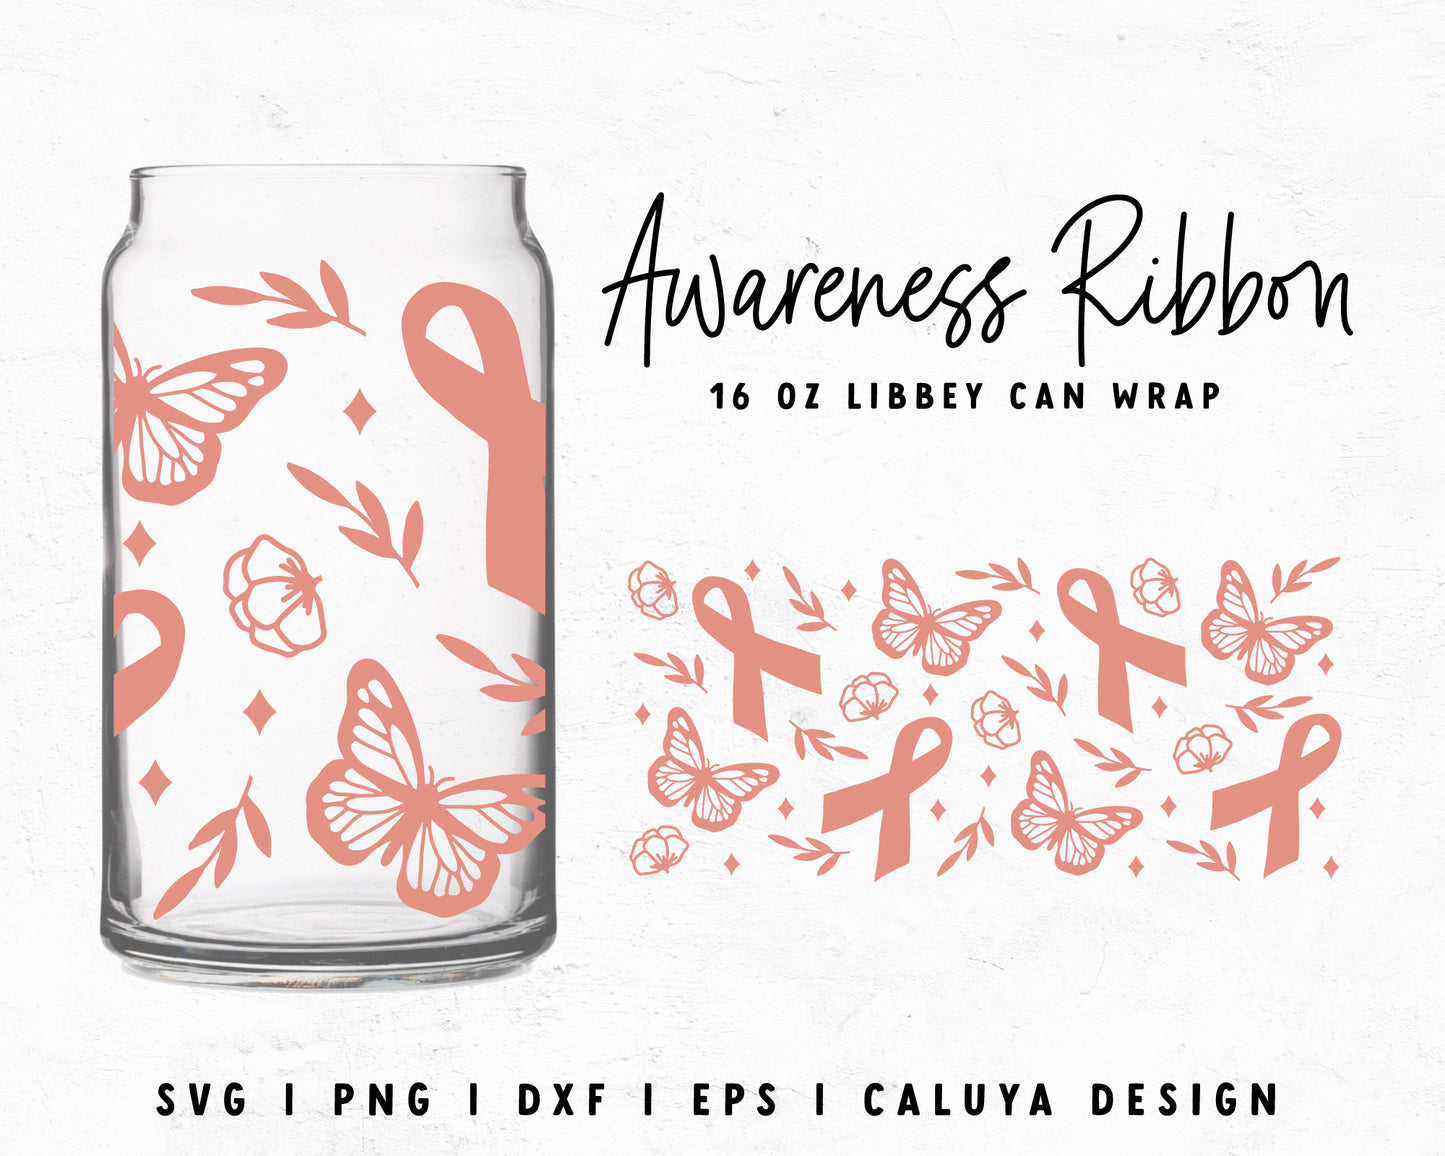 16oz Libbey Can Ribbons With Butterflies Wrap Cut File for Cricut, Cameo Silhouette | Free SVG Cut File